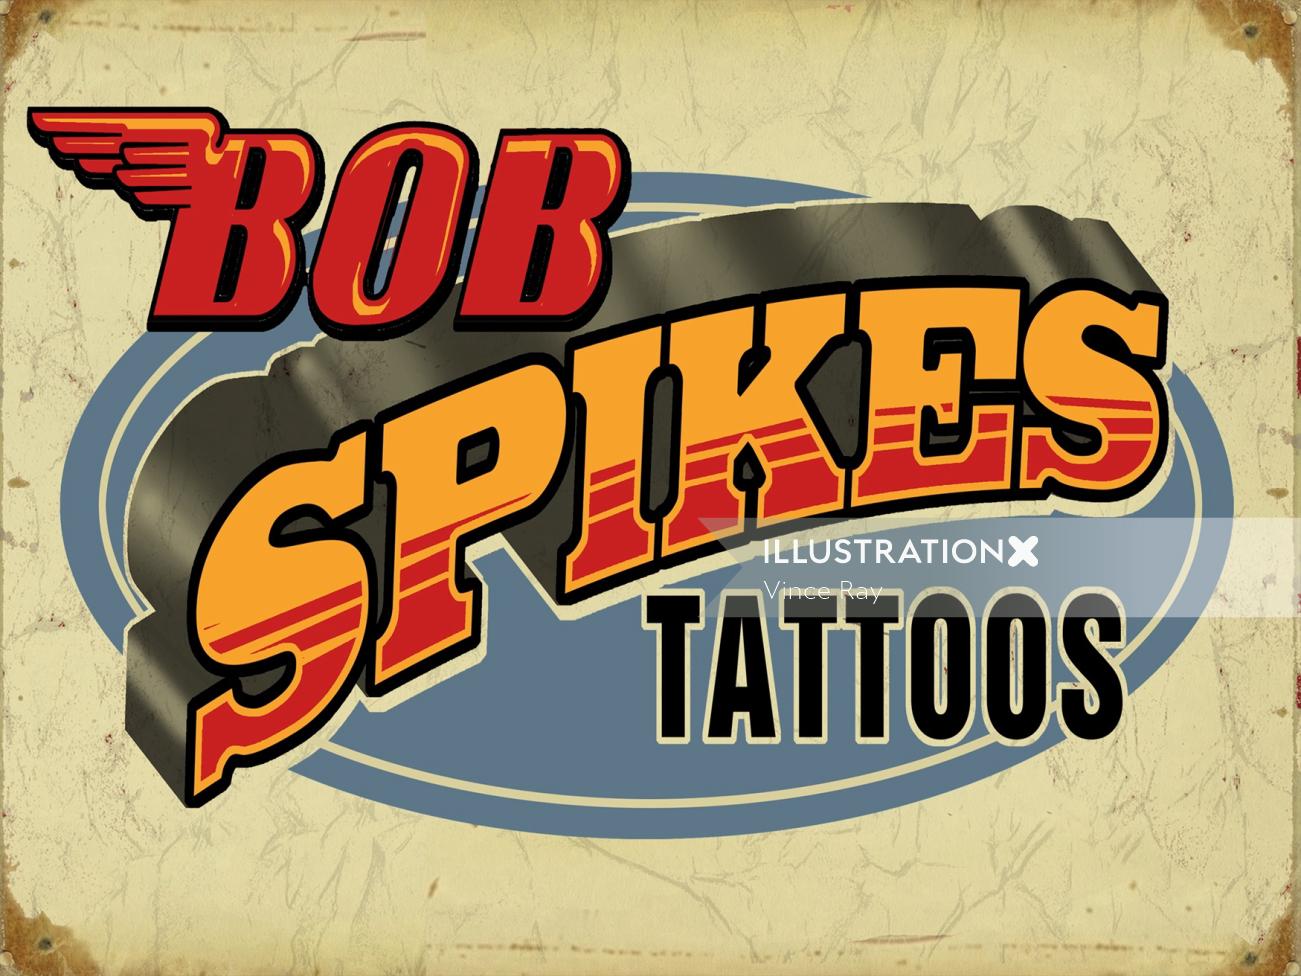 Hand lettering of Bob spikes tattoos 